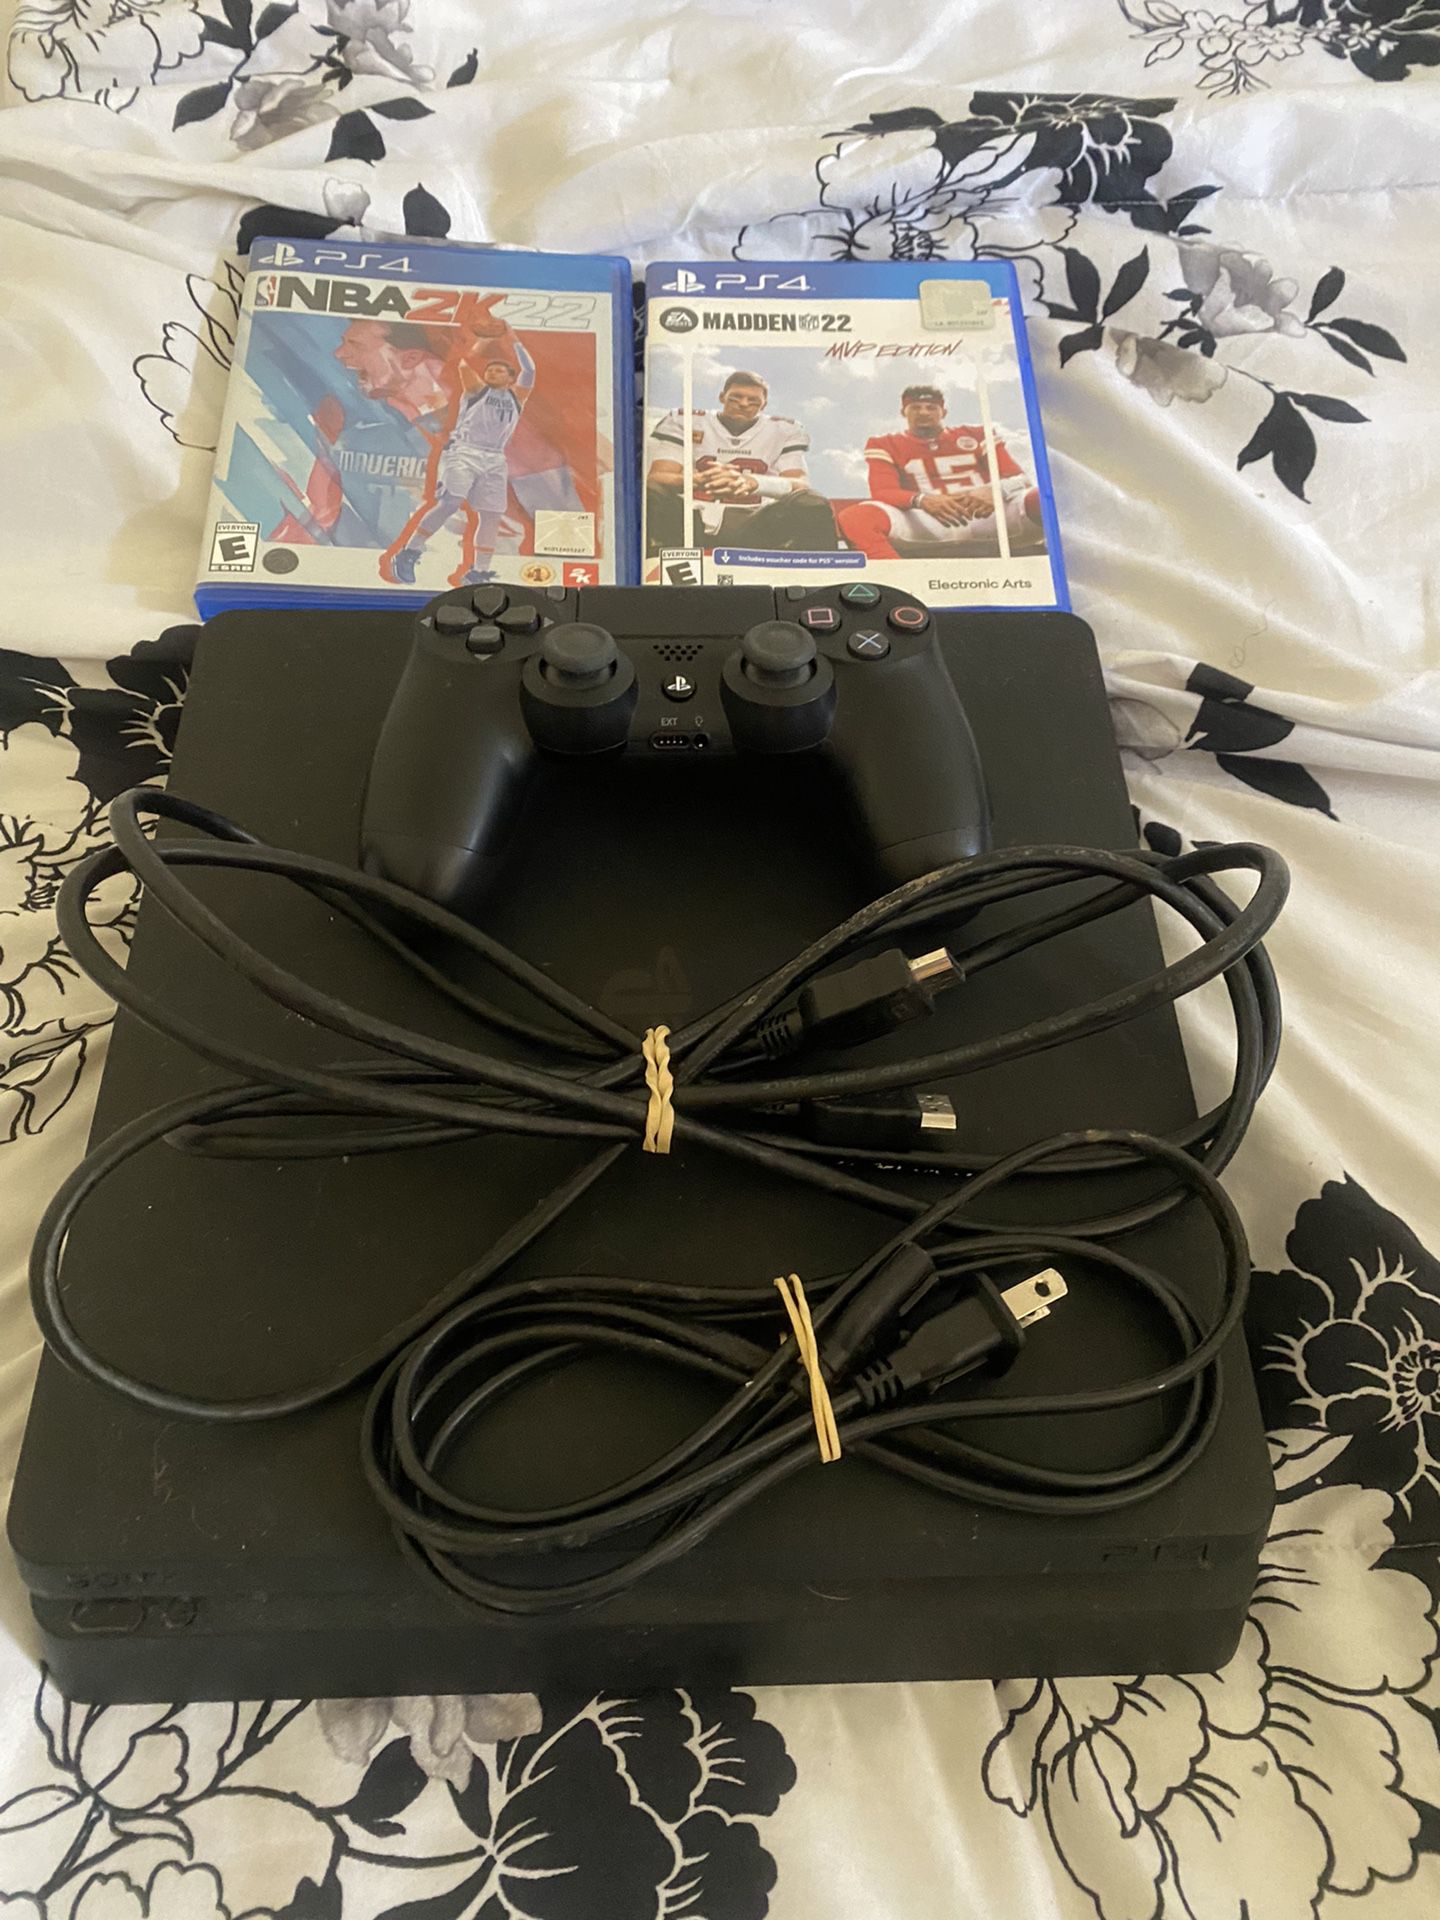 Lappe storm Grønne bønner Ps4 Slim 1tb Used Comes With All Cables 1 Controller And 2 Games for Sale  in Victorville, CA - OfferUp